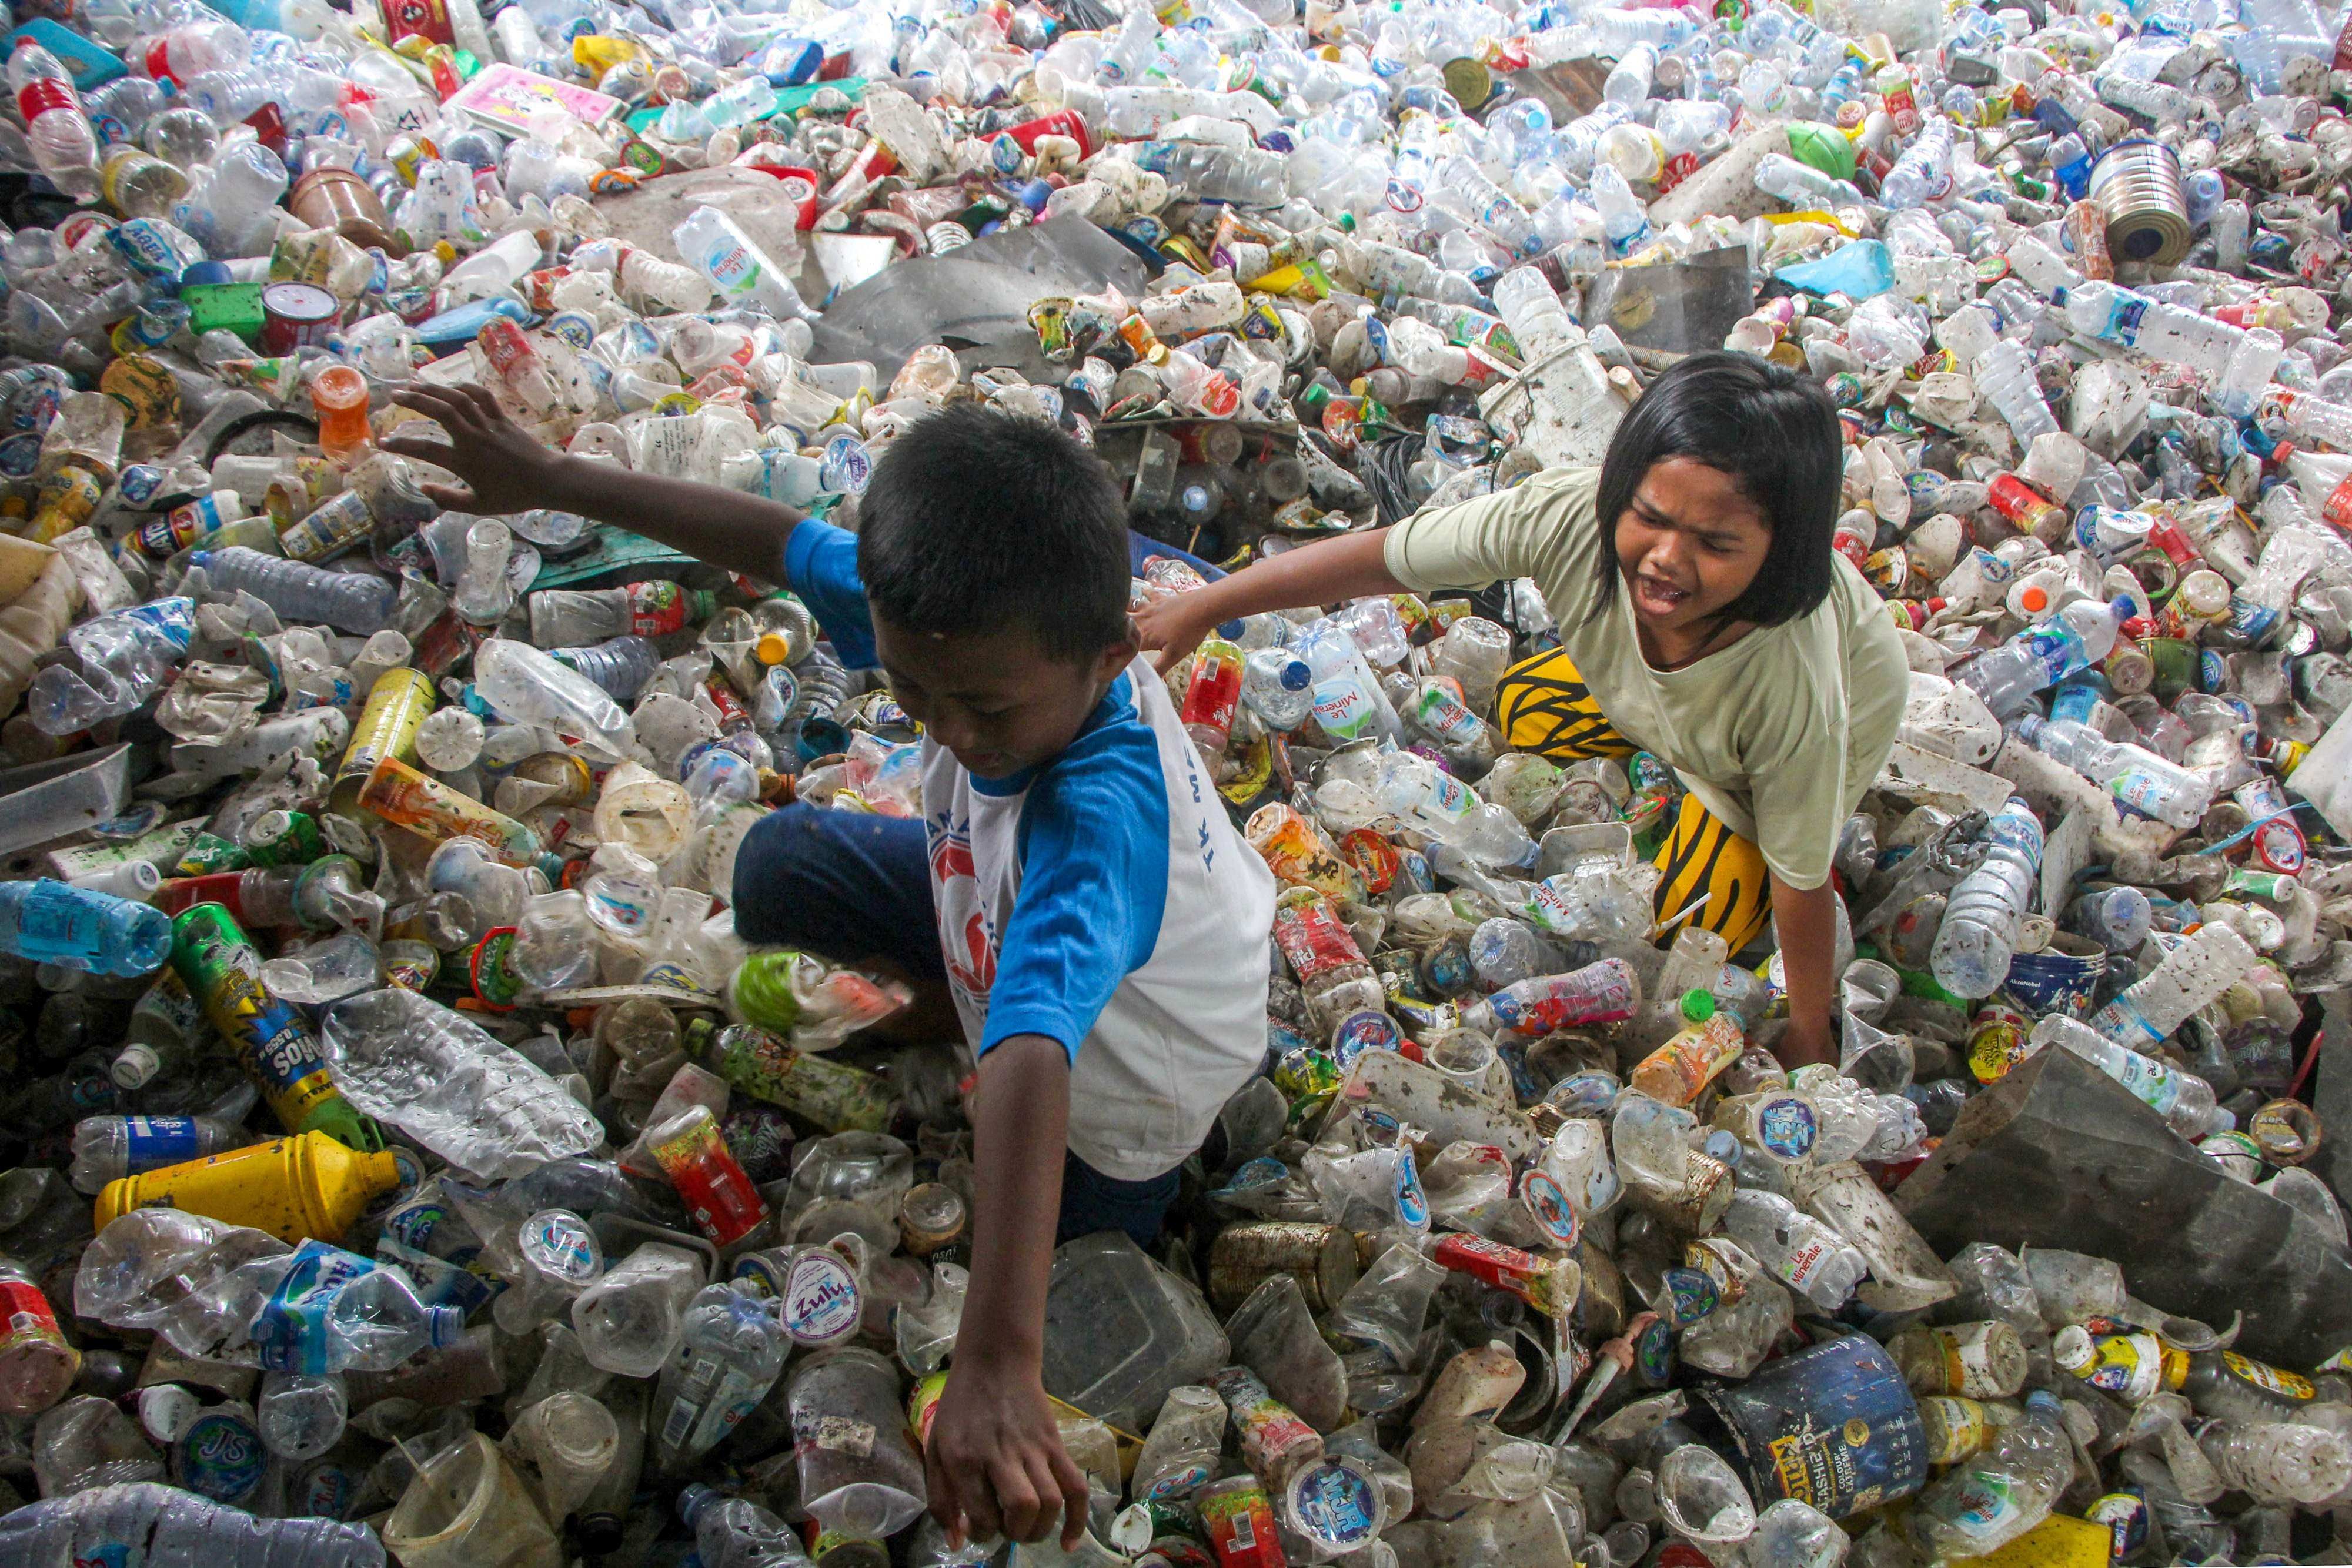 Children play in plastic waste collected for recycling in Makassar, Indonesia. The torrent of man-made chemical and plastic waste worldwide has massively exceeded limits safe for humanity or the planet. Photo: AFP